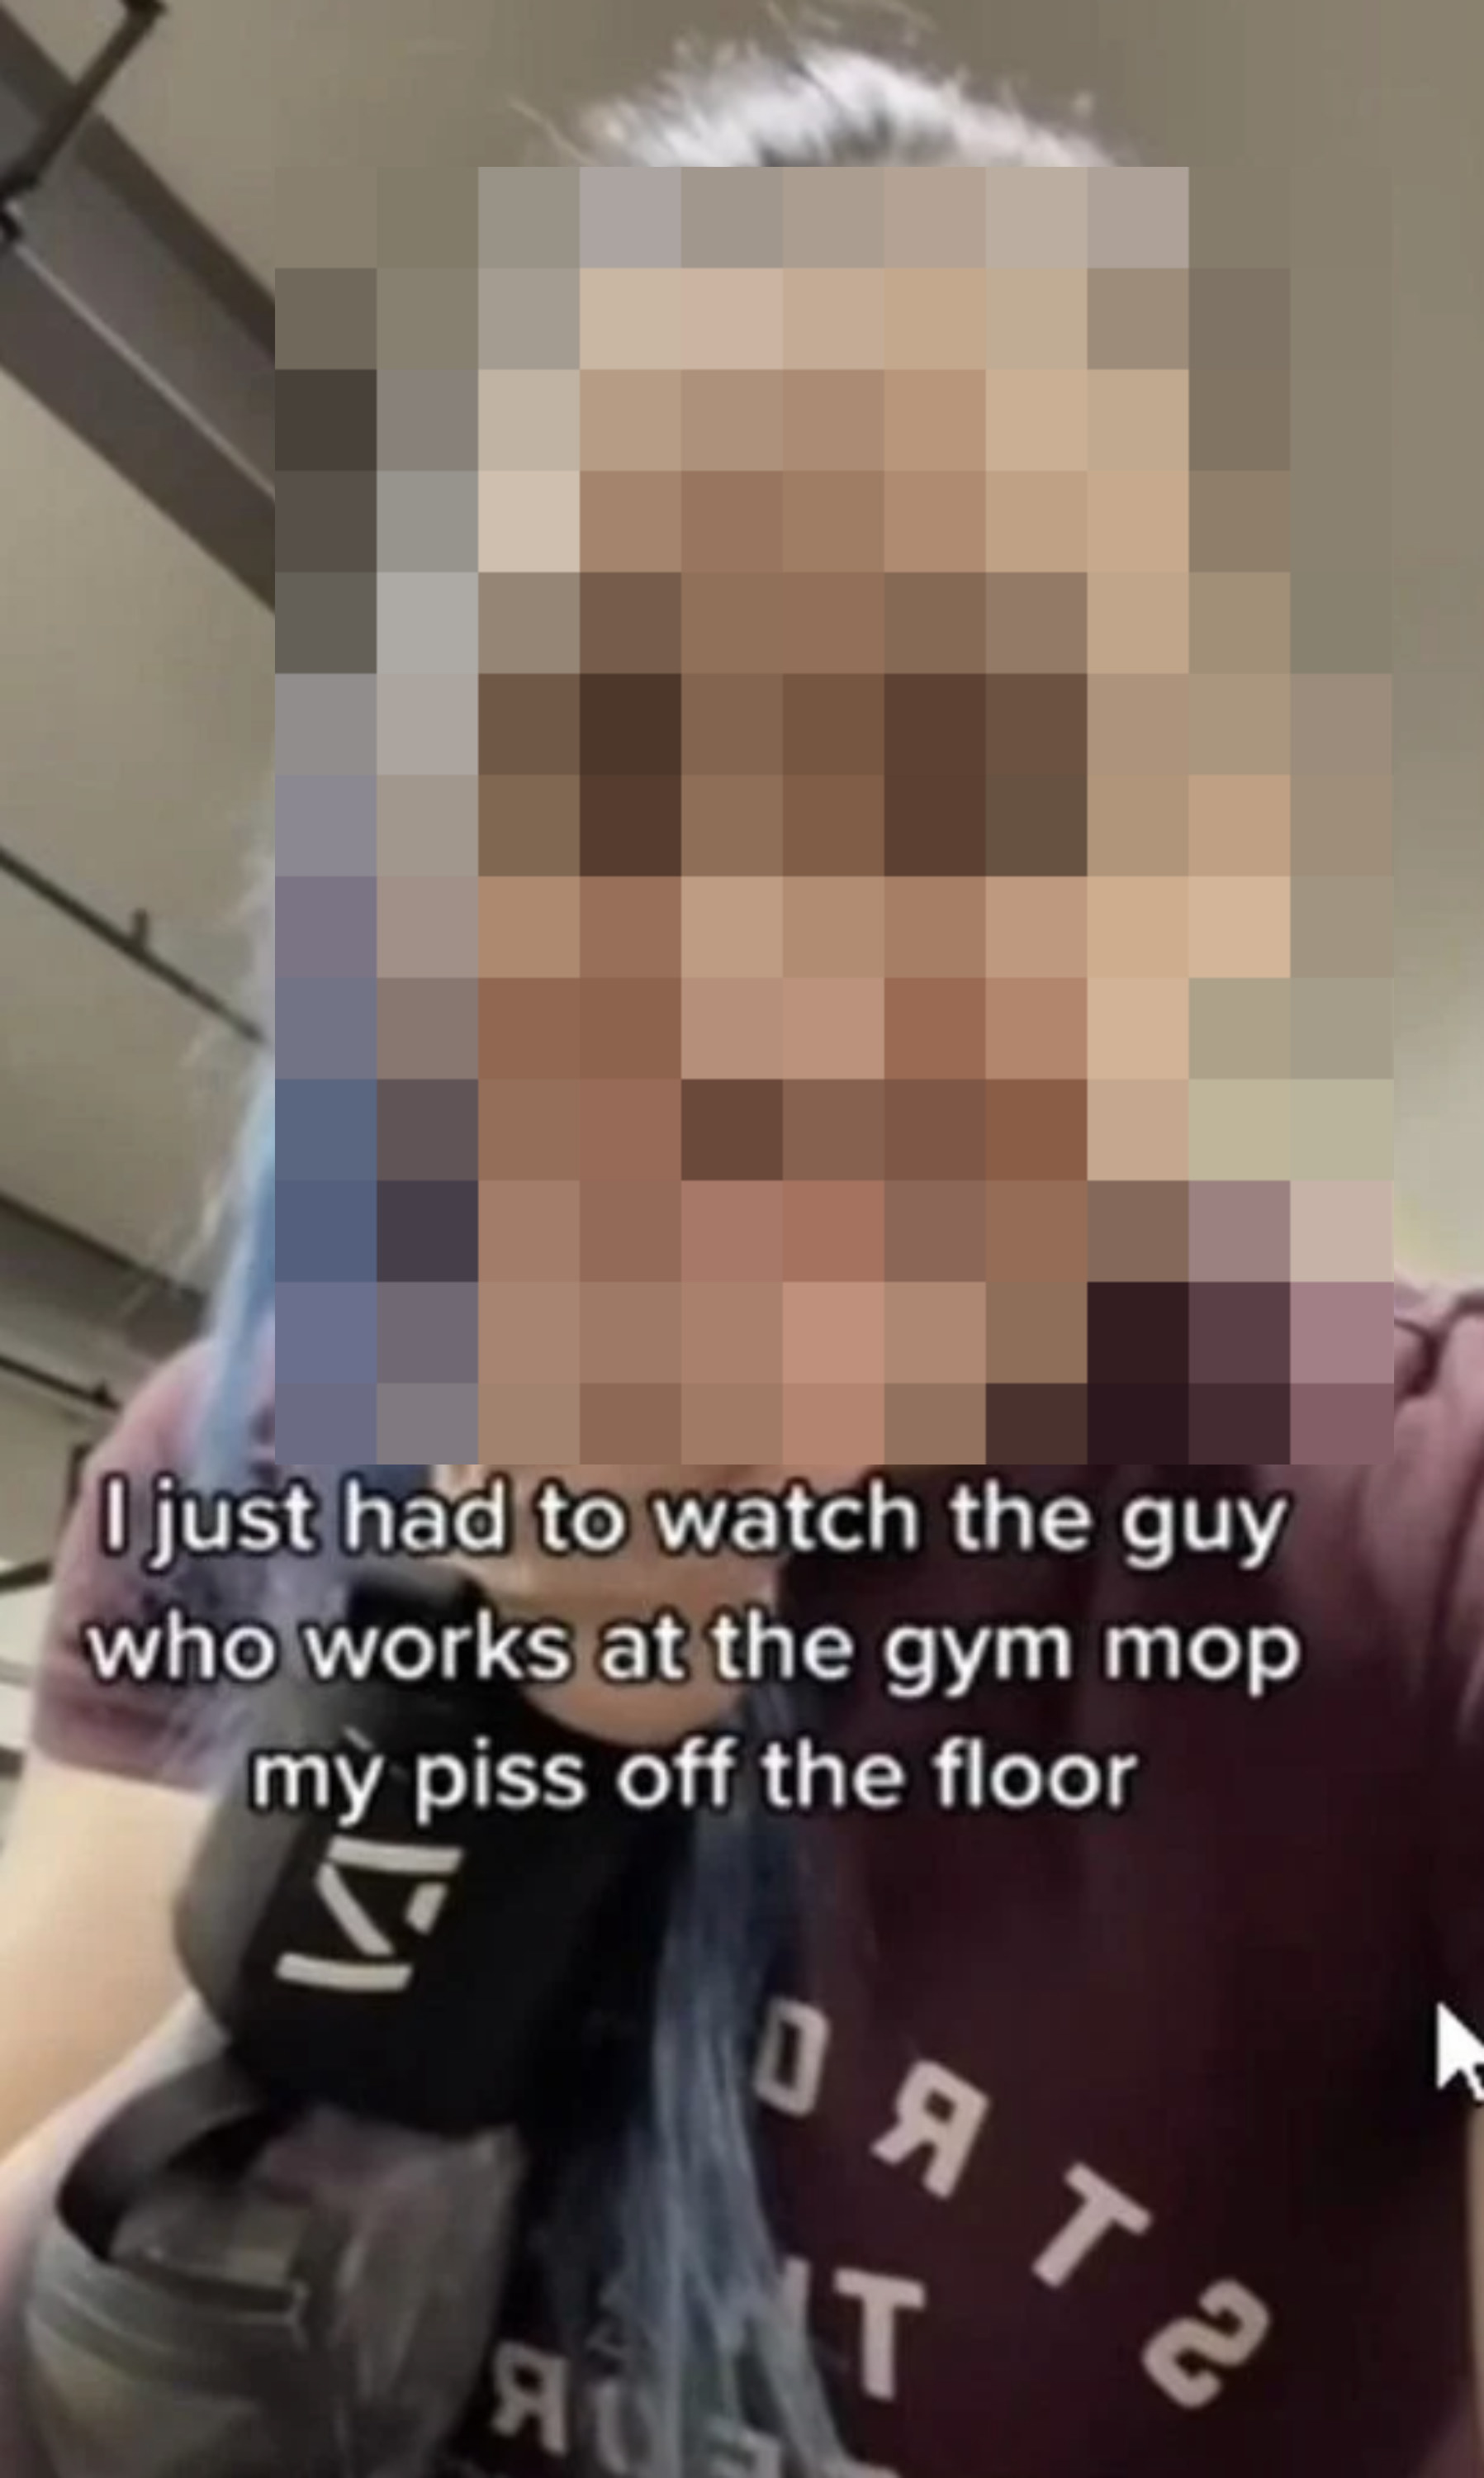 &quot;I just had to watch the guy who works at the gym mop my piss off the floor&quot;